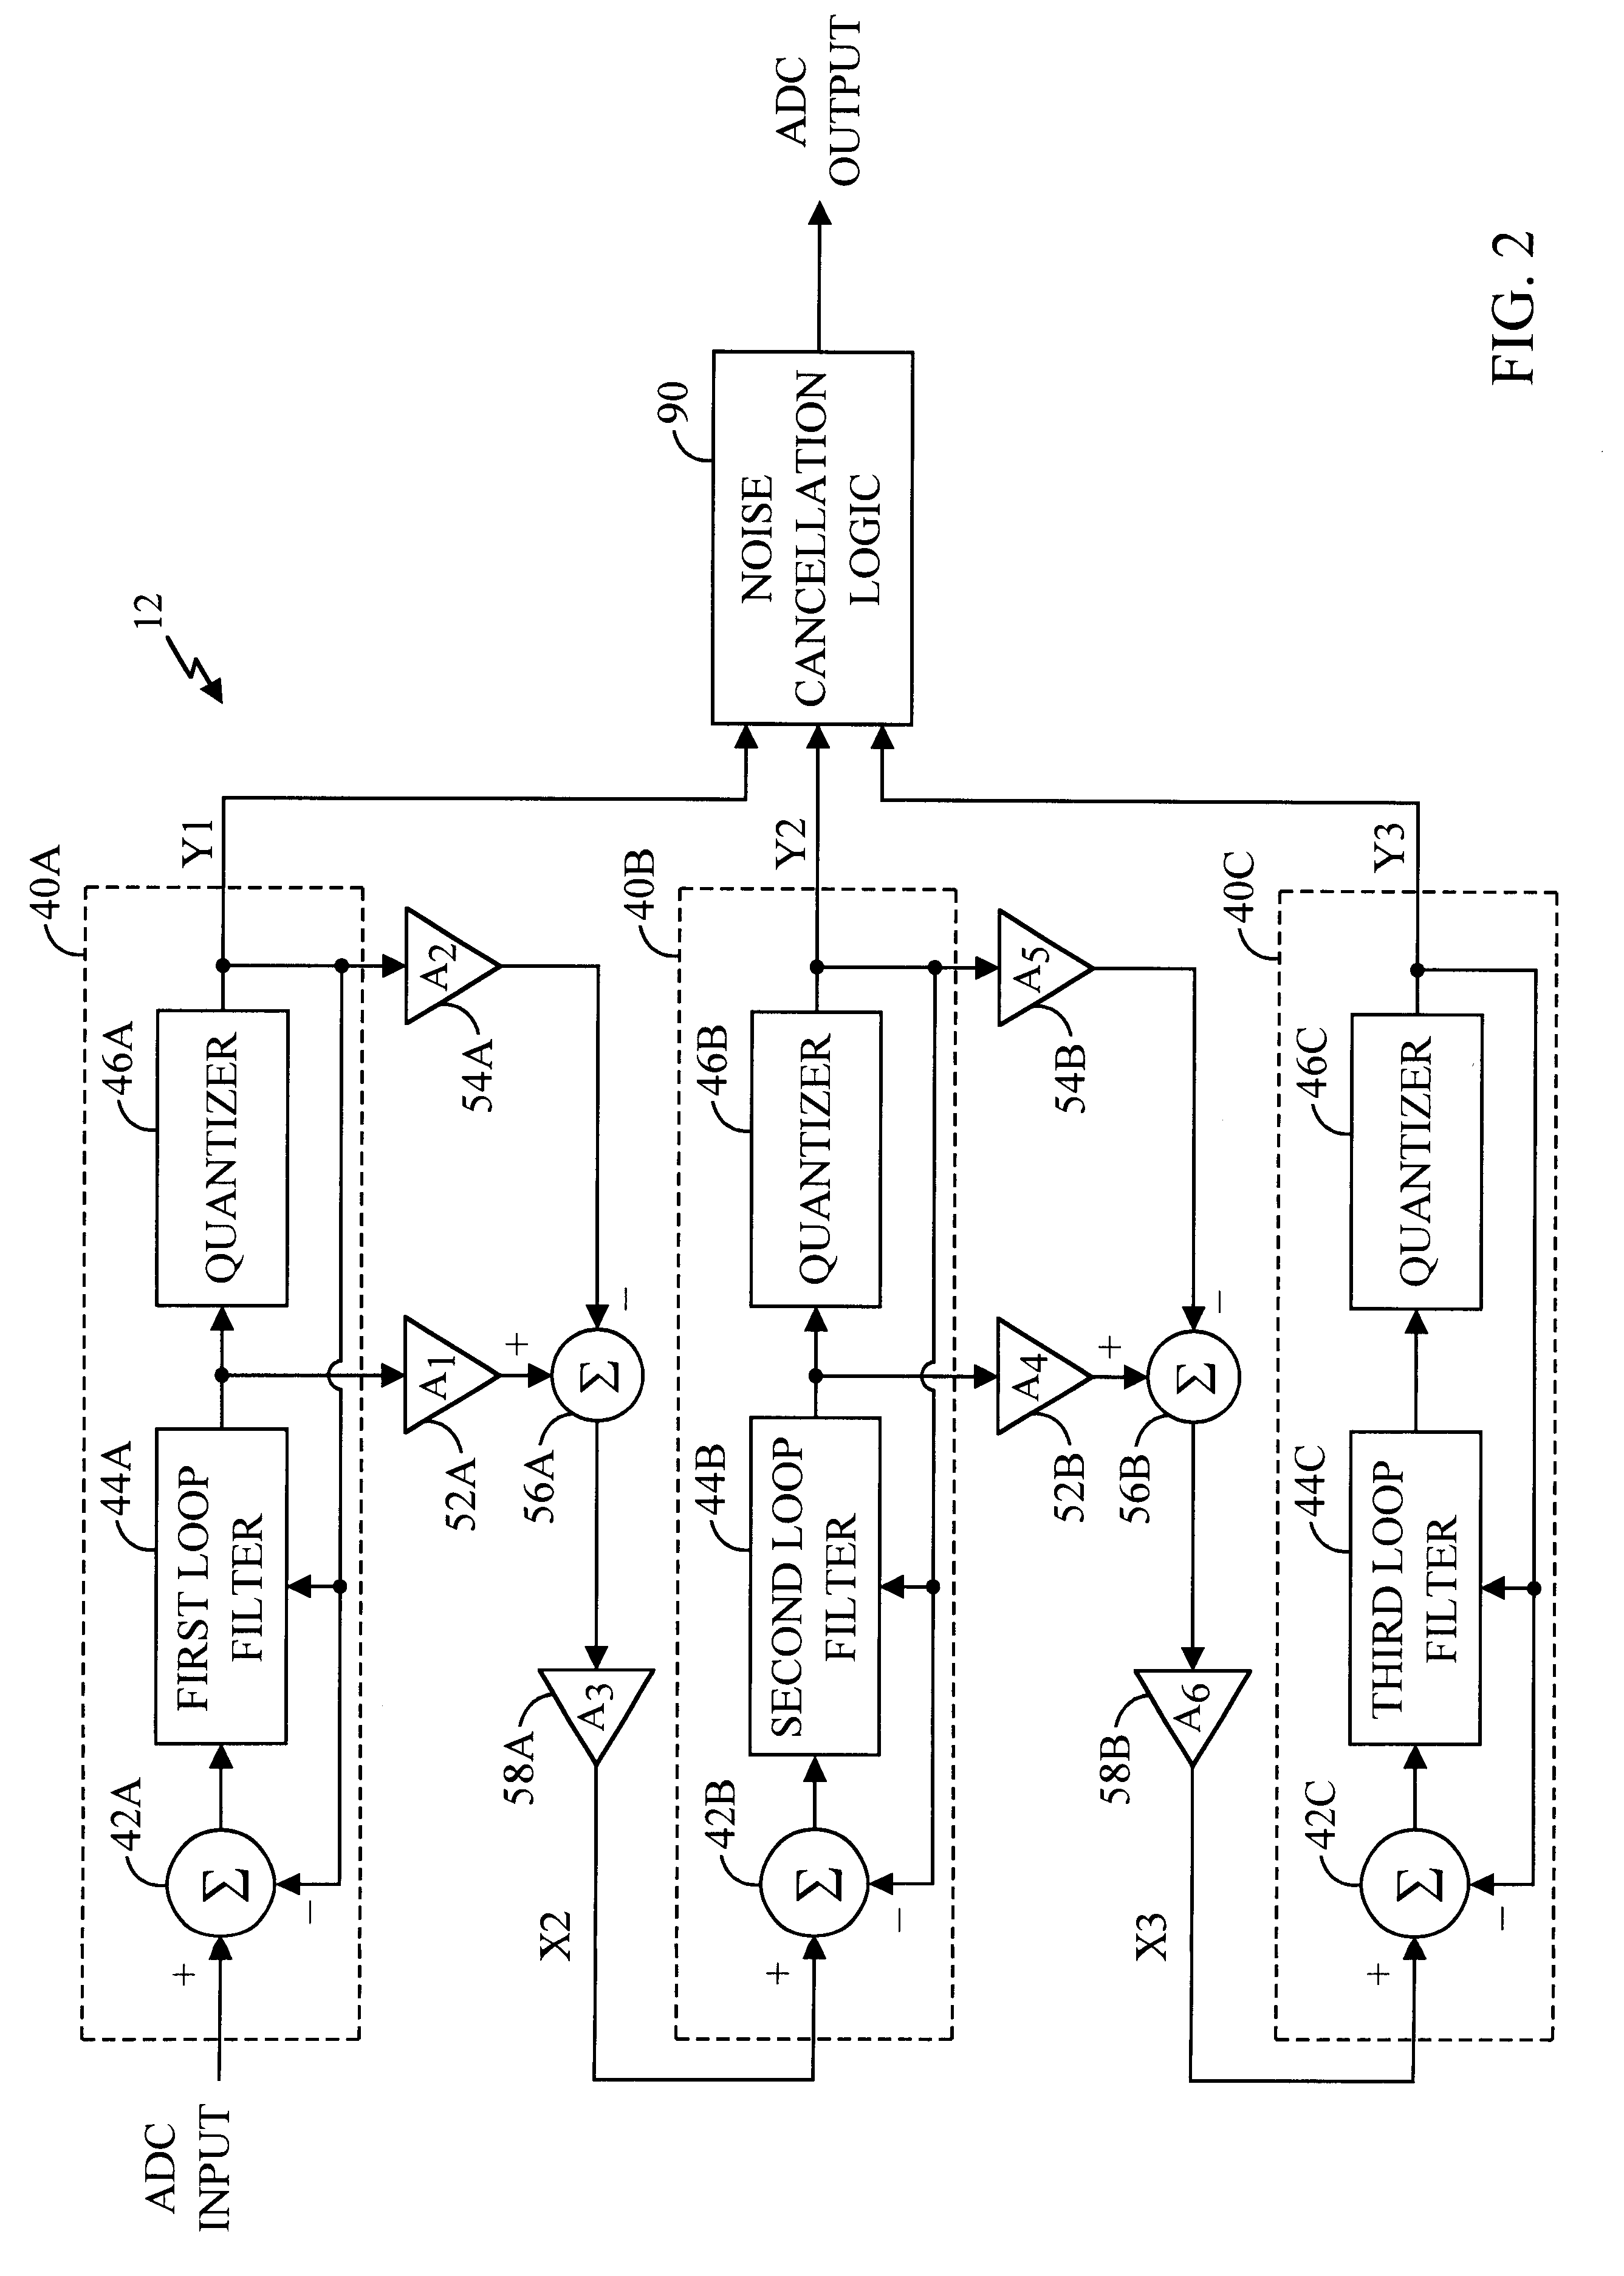 Method and apparatus for controlling stages of a multi-stage circuit